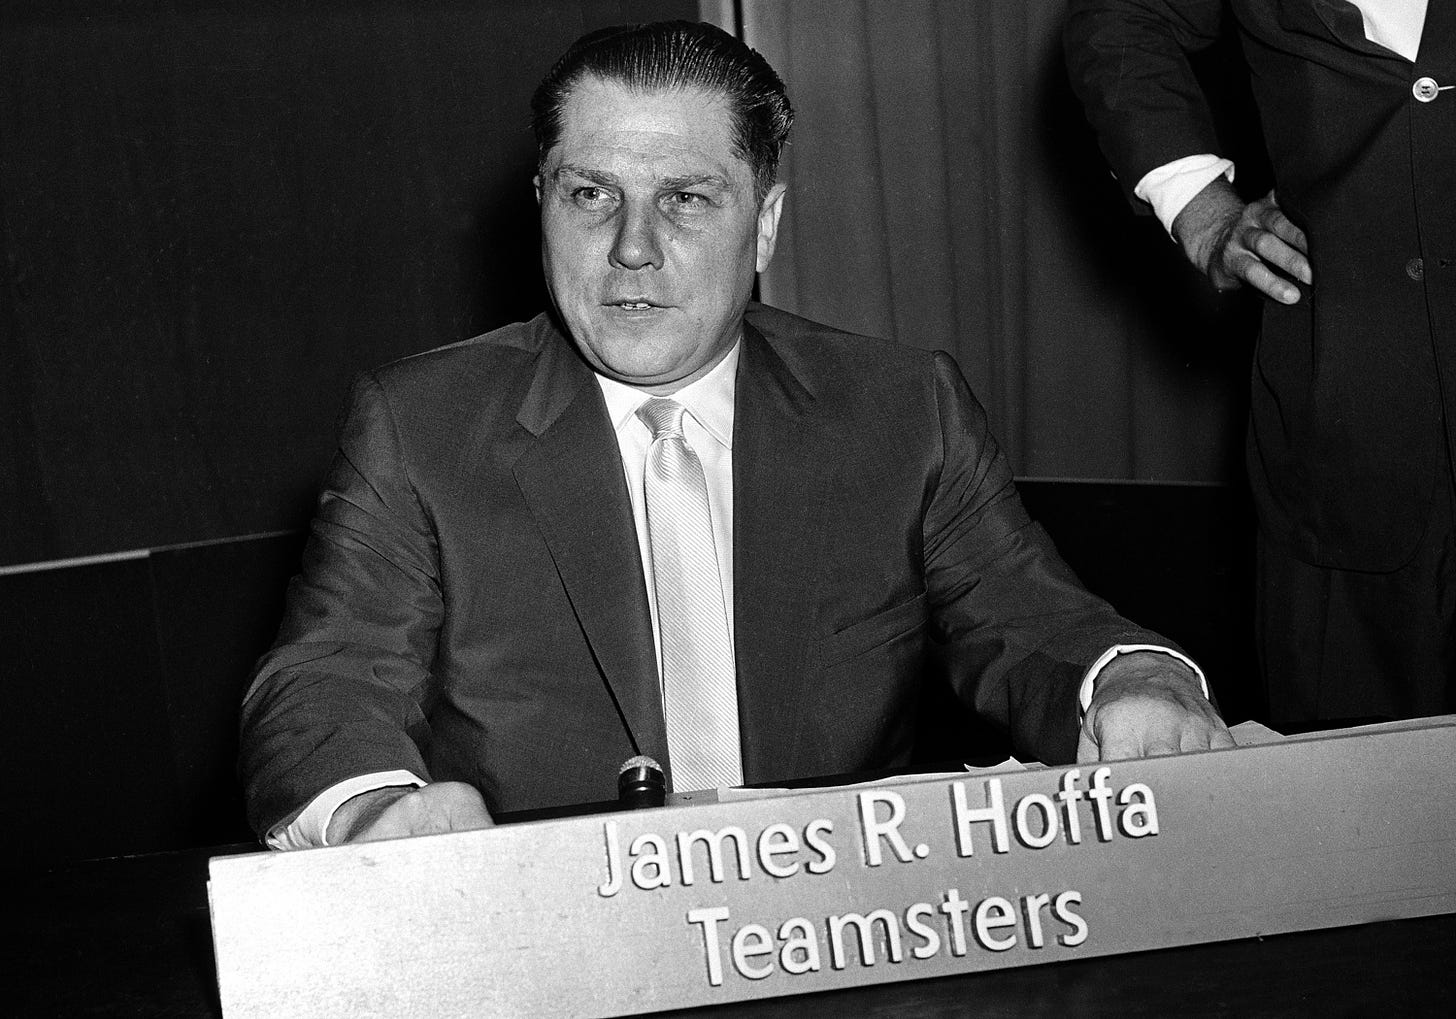 Jimmy Hoffa disappeared 48 years ago. His case is still unsolved